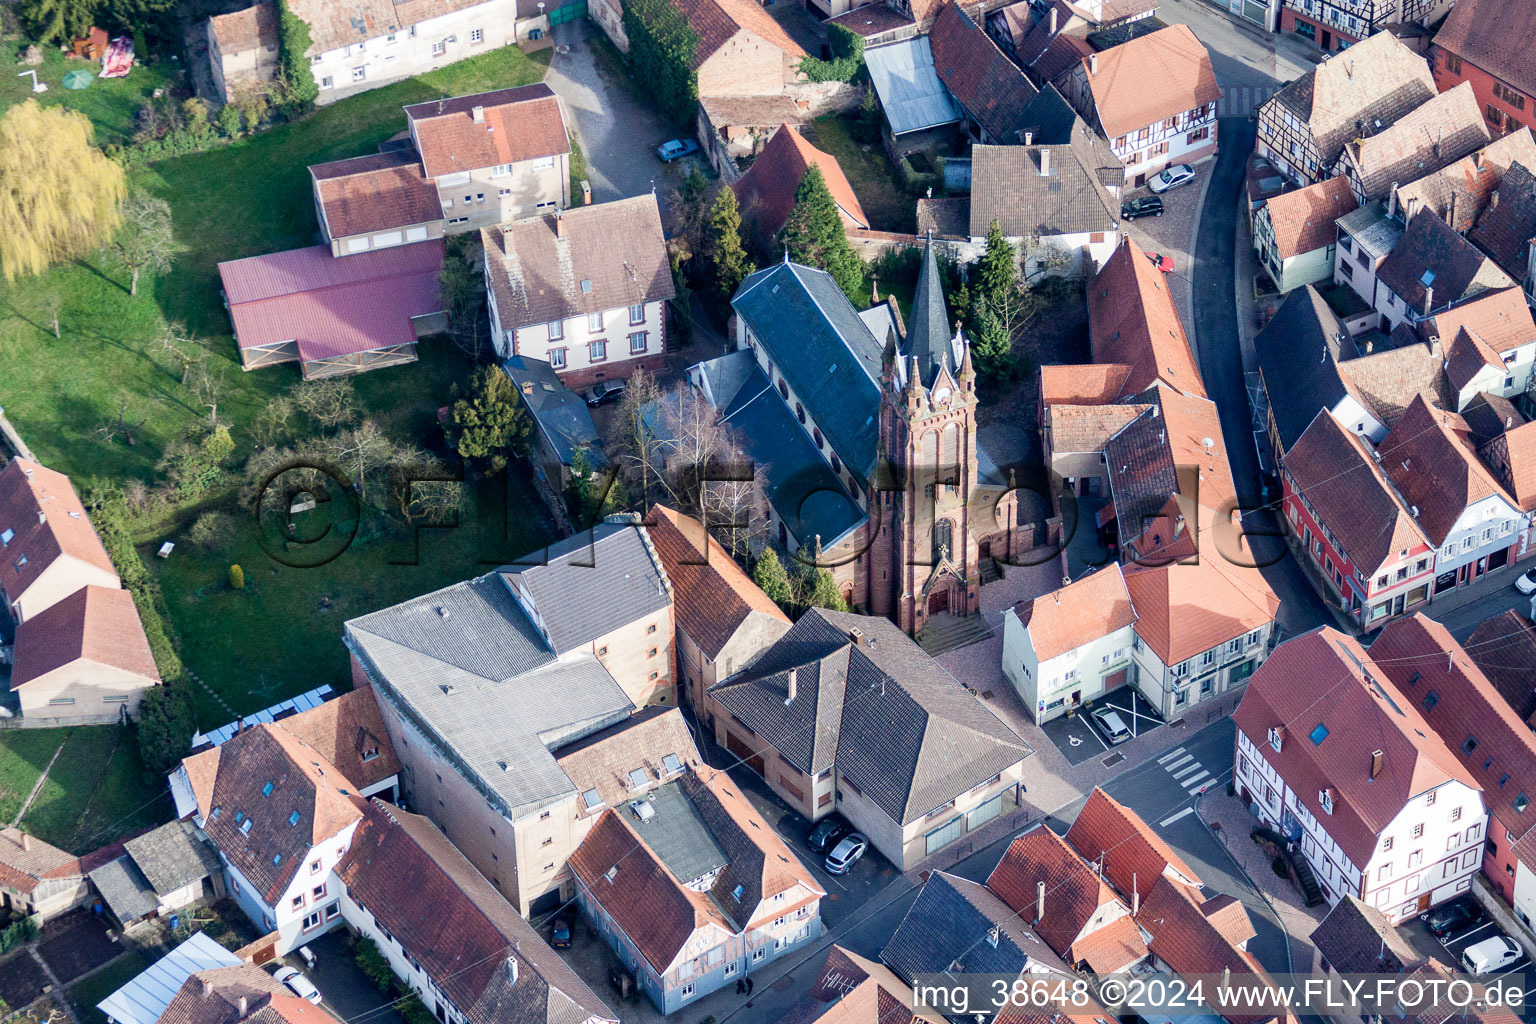 Aerial view of The city center in the downtown area in Pfaffenhoffen in Grand Est, France